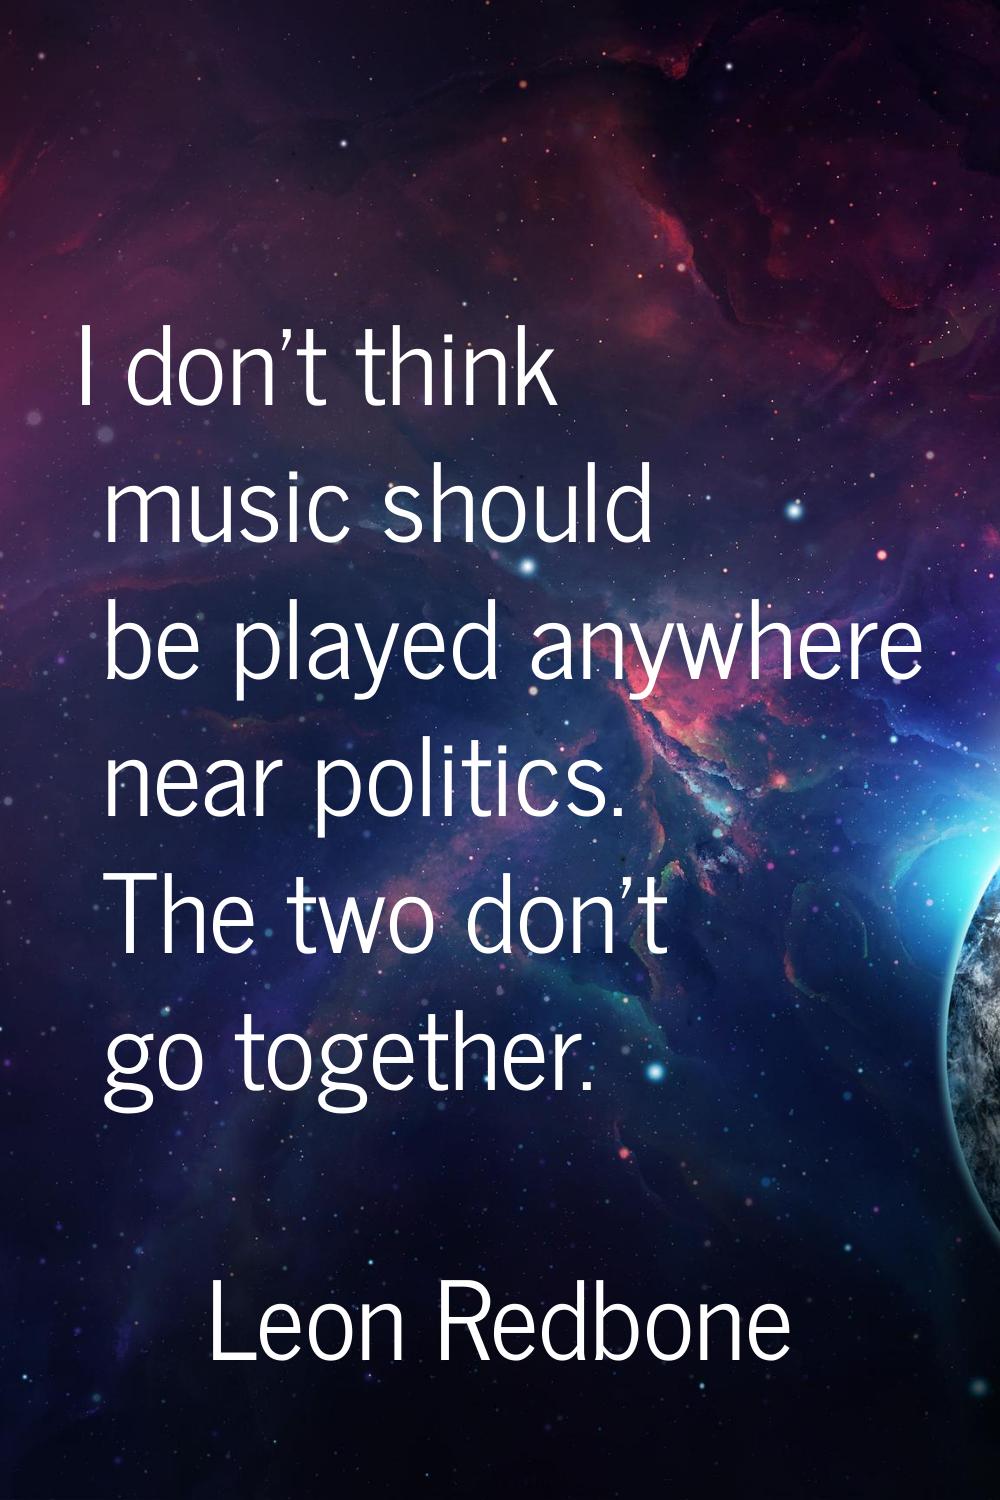 I don't think music should be played anywhere near politics. The two don't go together.